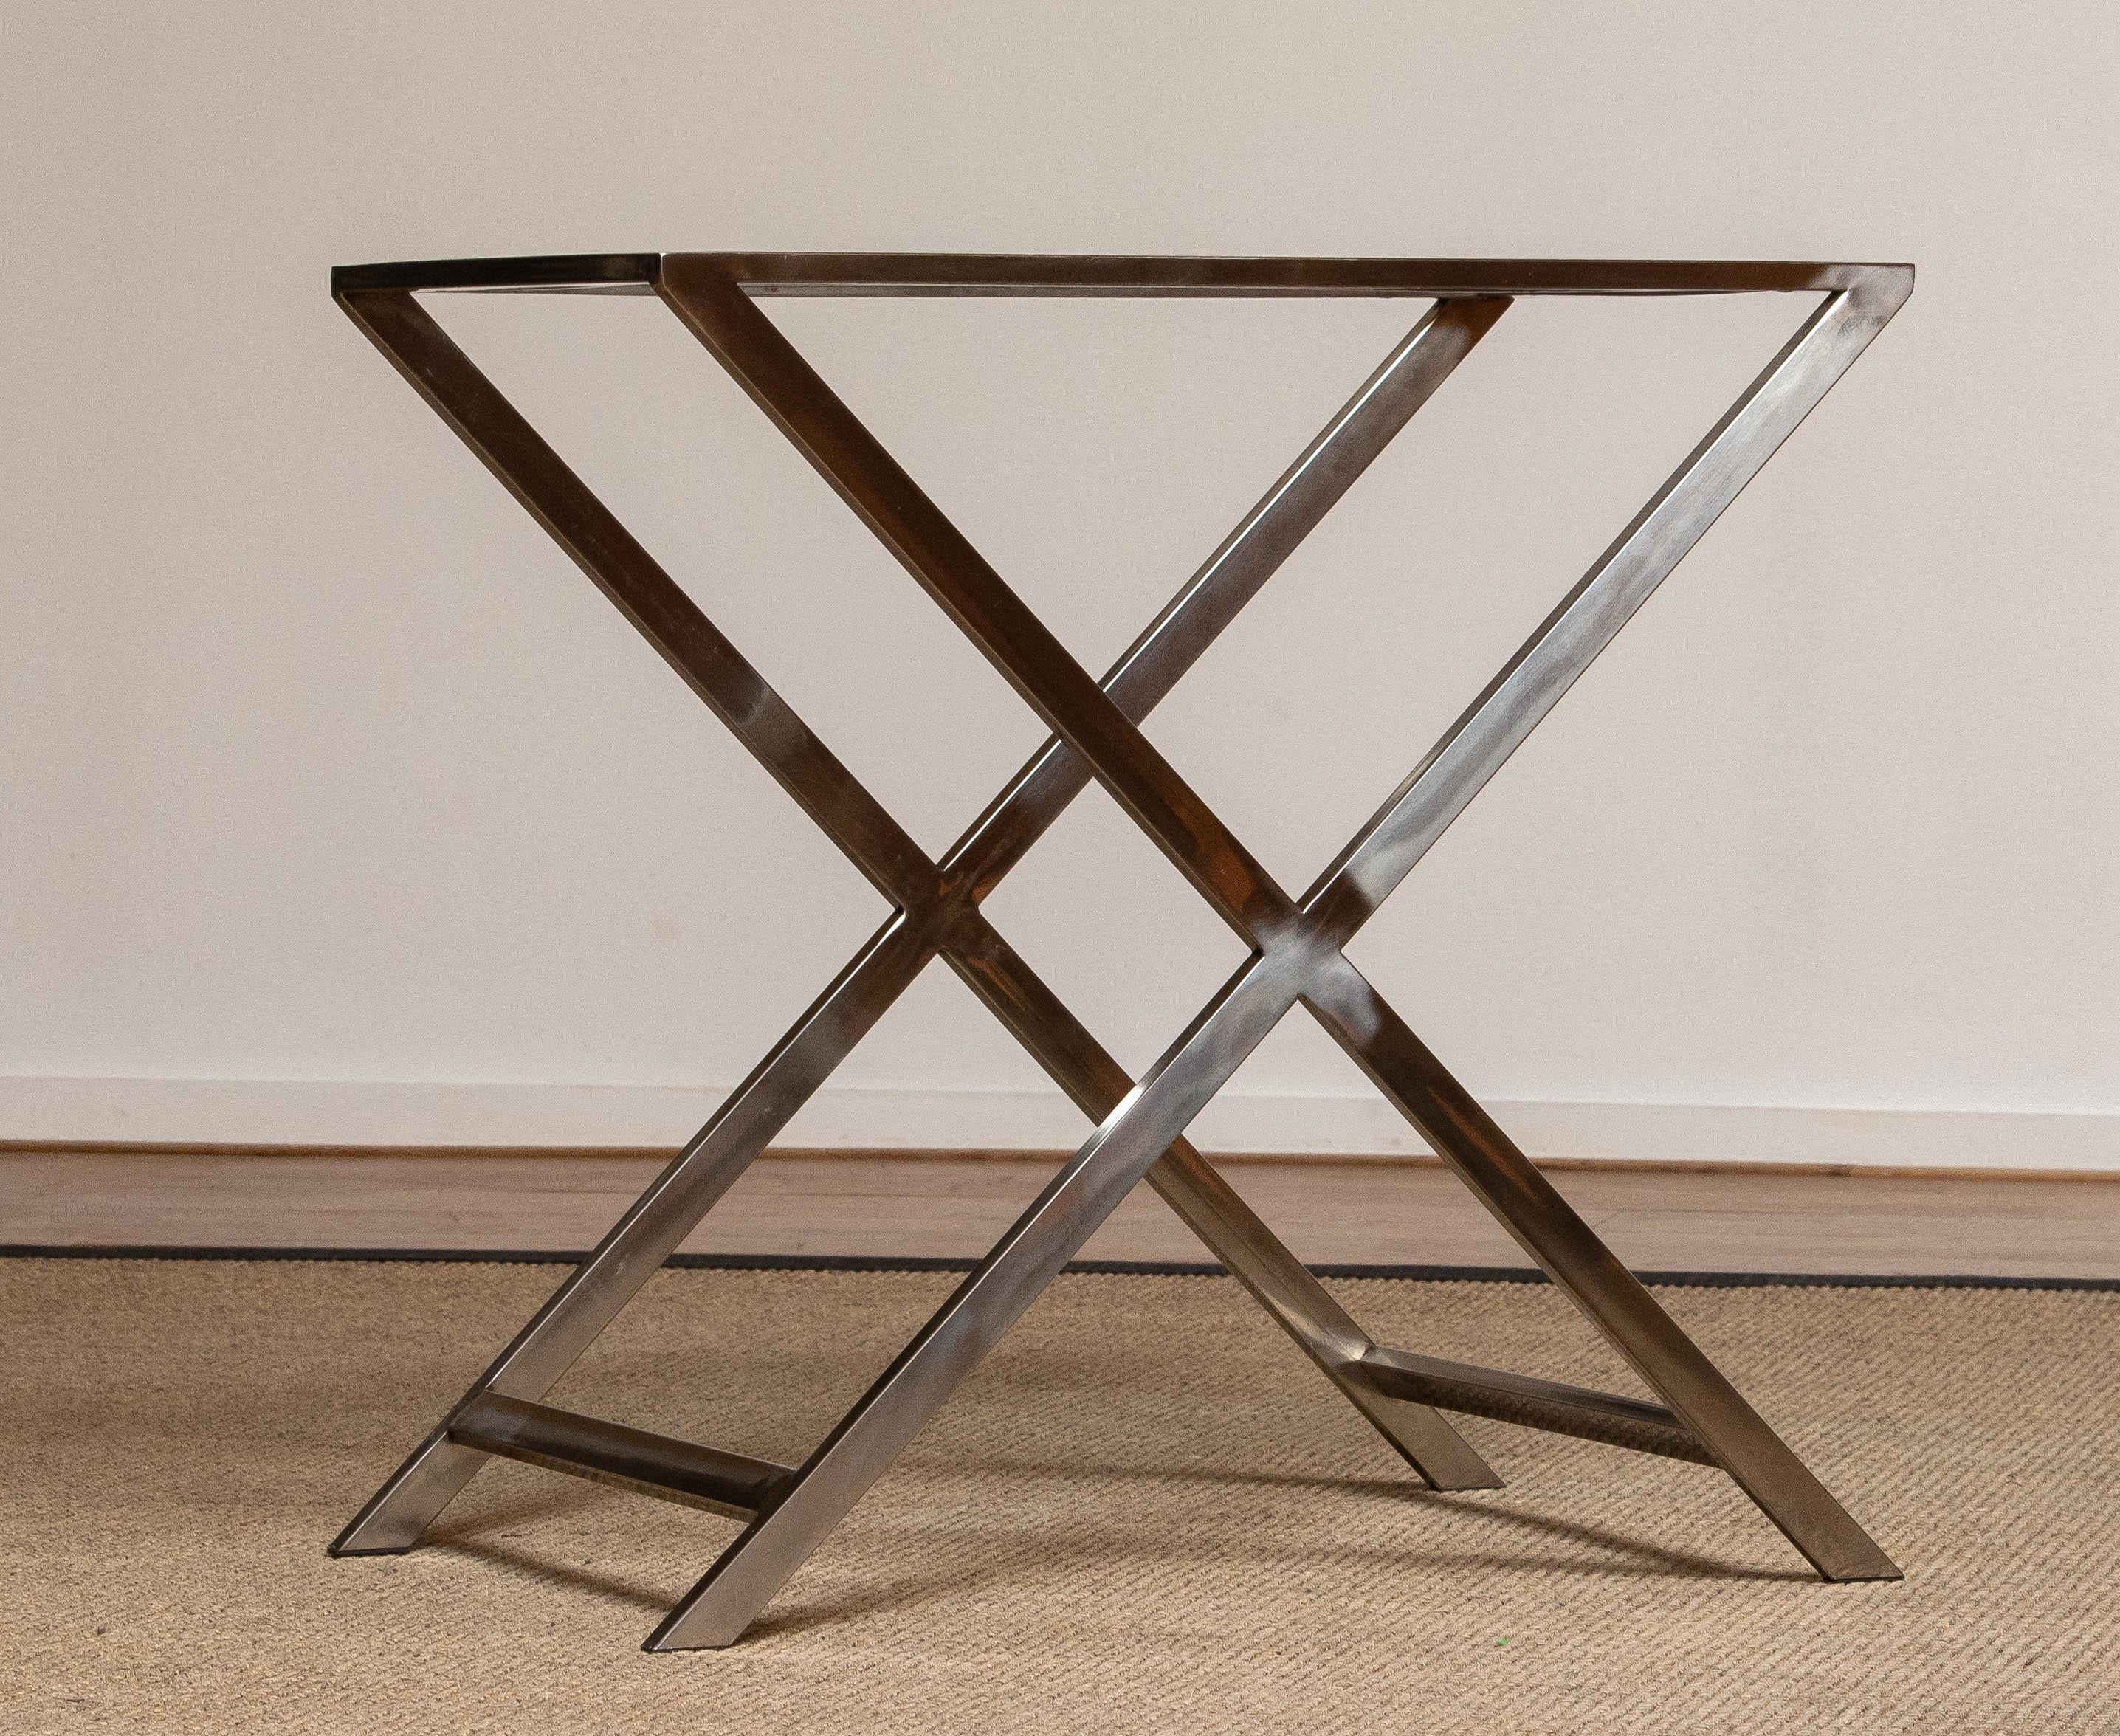 1970's Chrome X / Cross Legs Site Table with Glass Top in Milo Baughman Style For Sale 2